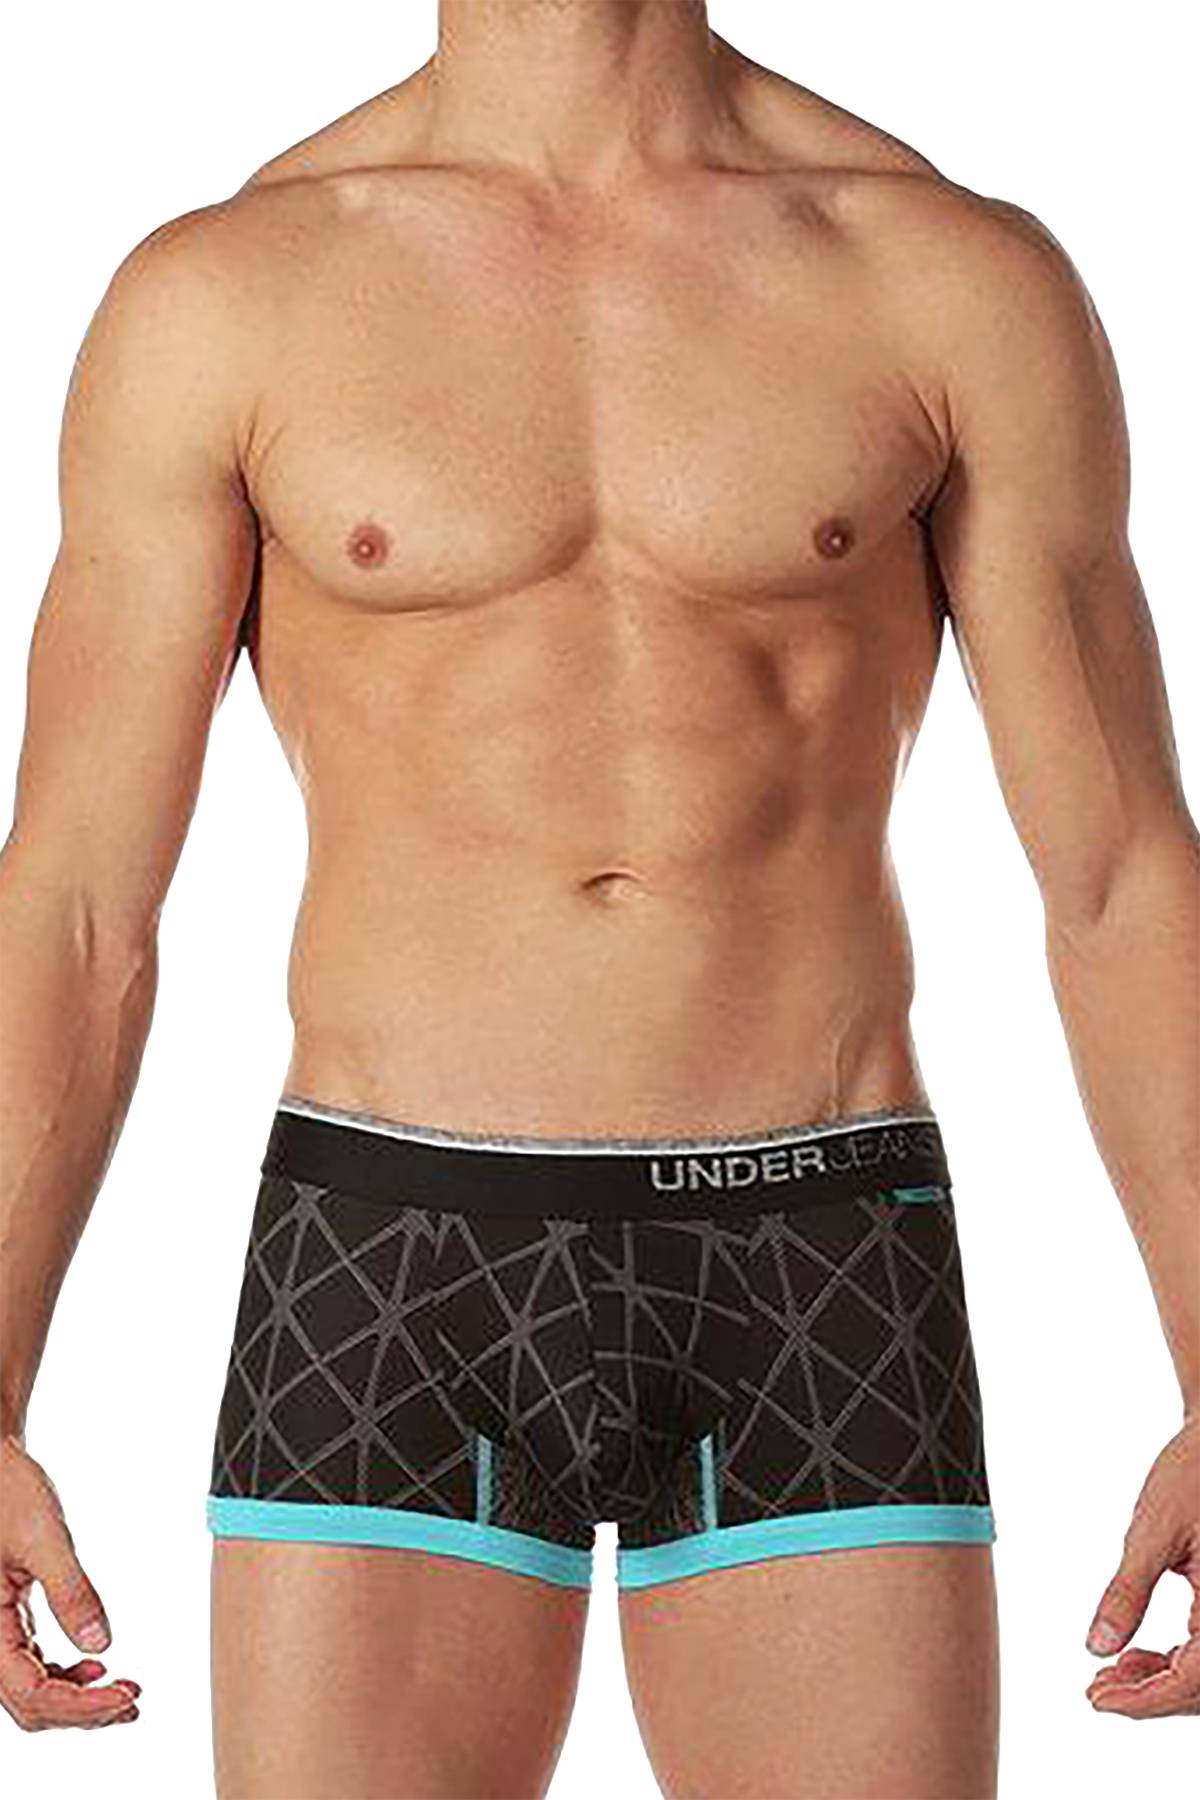 Junk Underjeans Ice Infuse Trunk